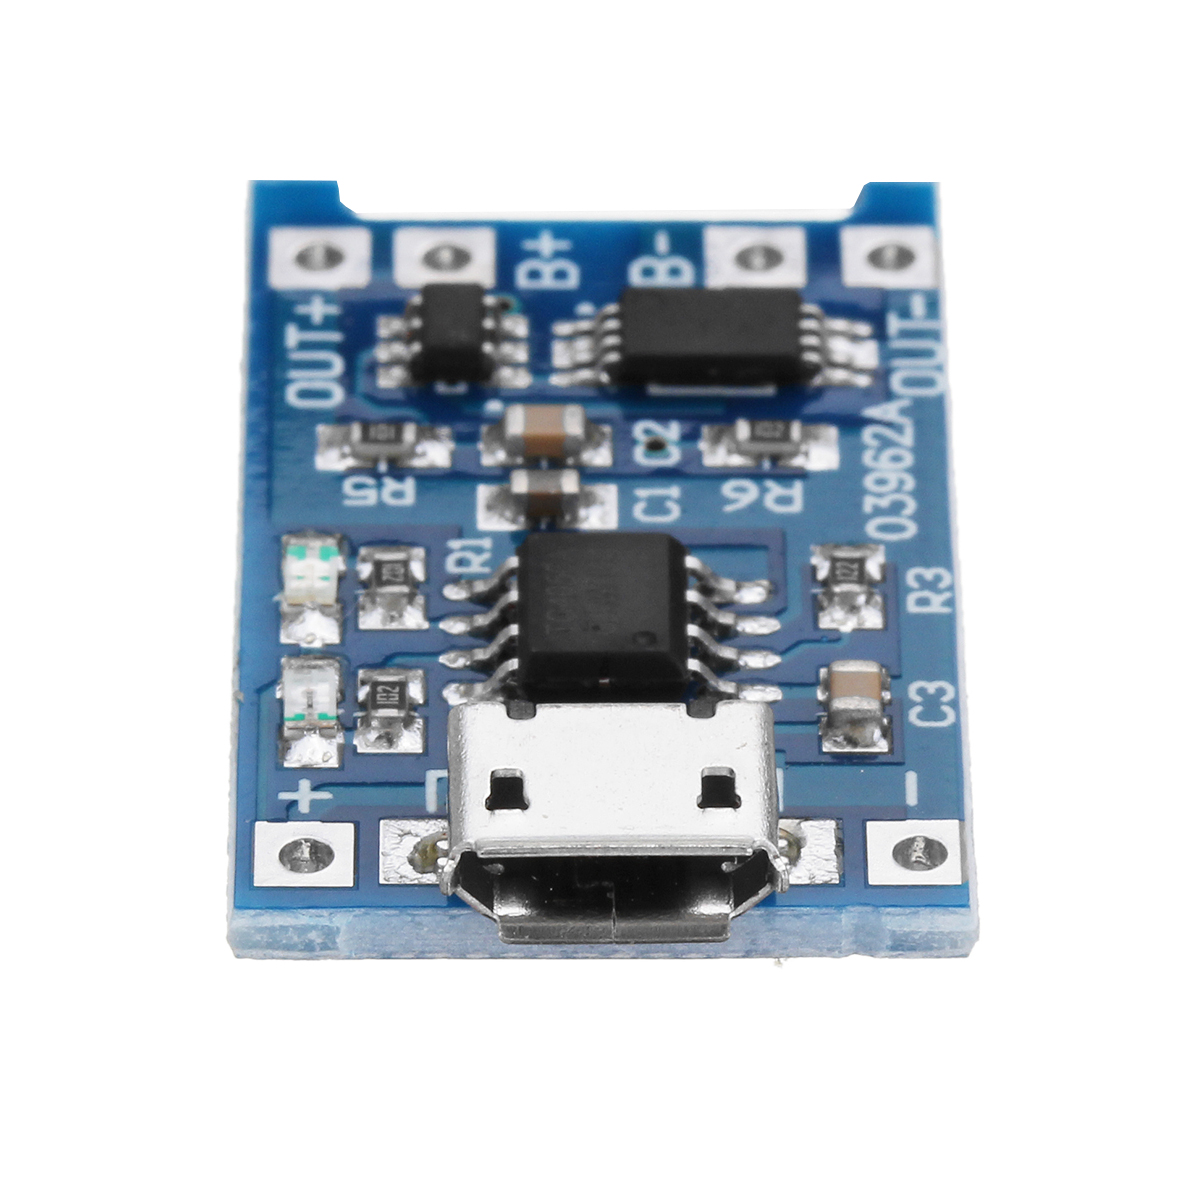 TP4056-Micro-USB-5V-1A-Lithium-Battery-Charging-Protection-Board-TE585-Lipo-Charger-Module-1225993